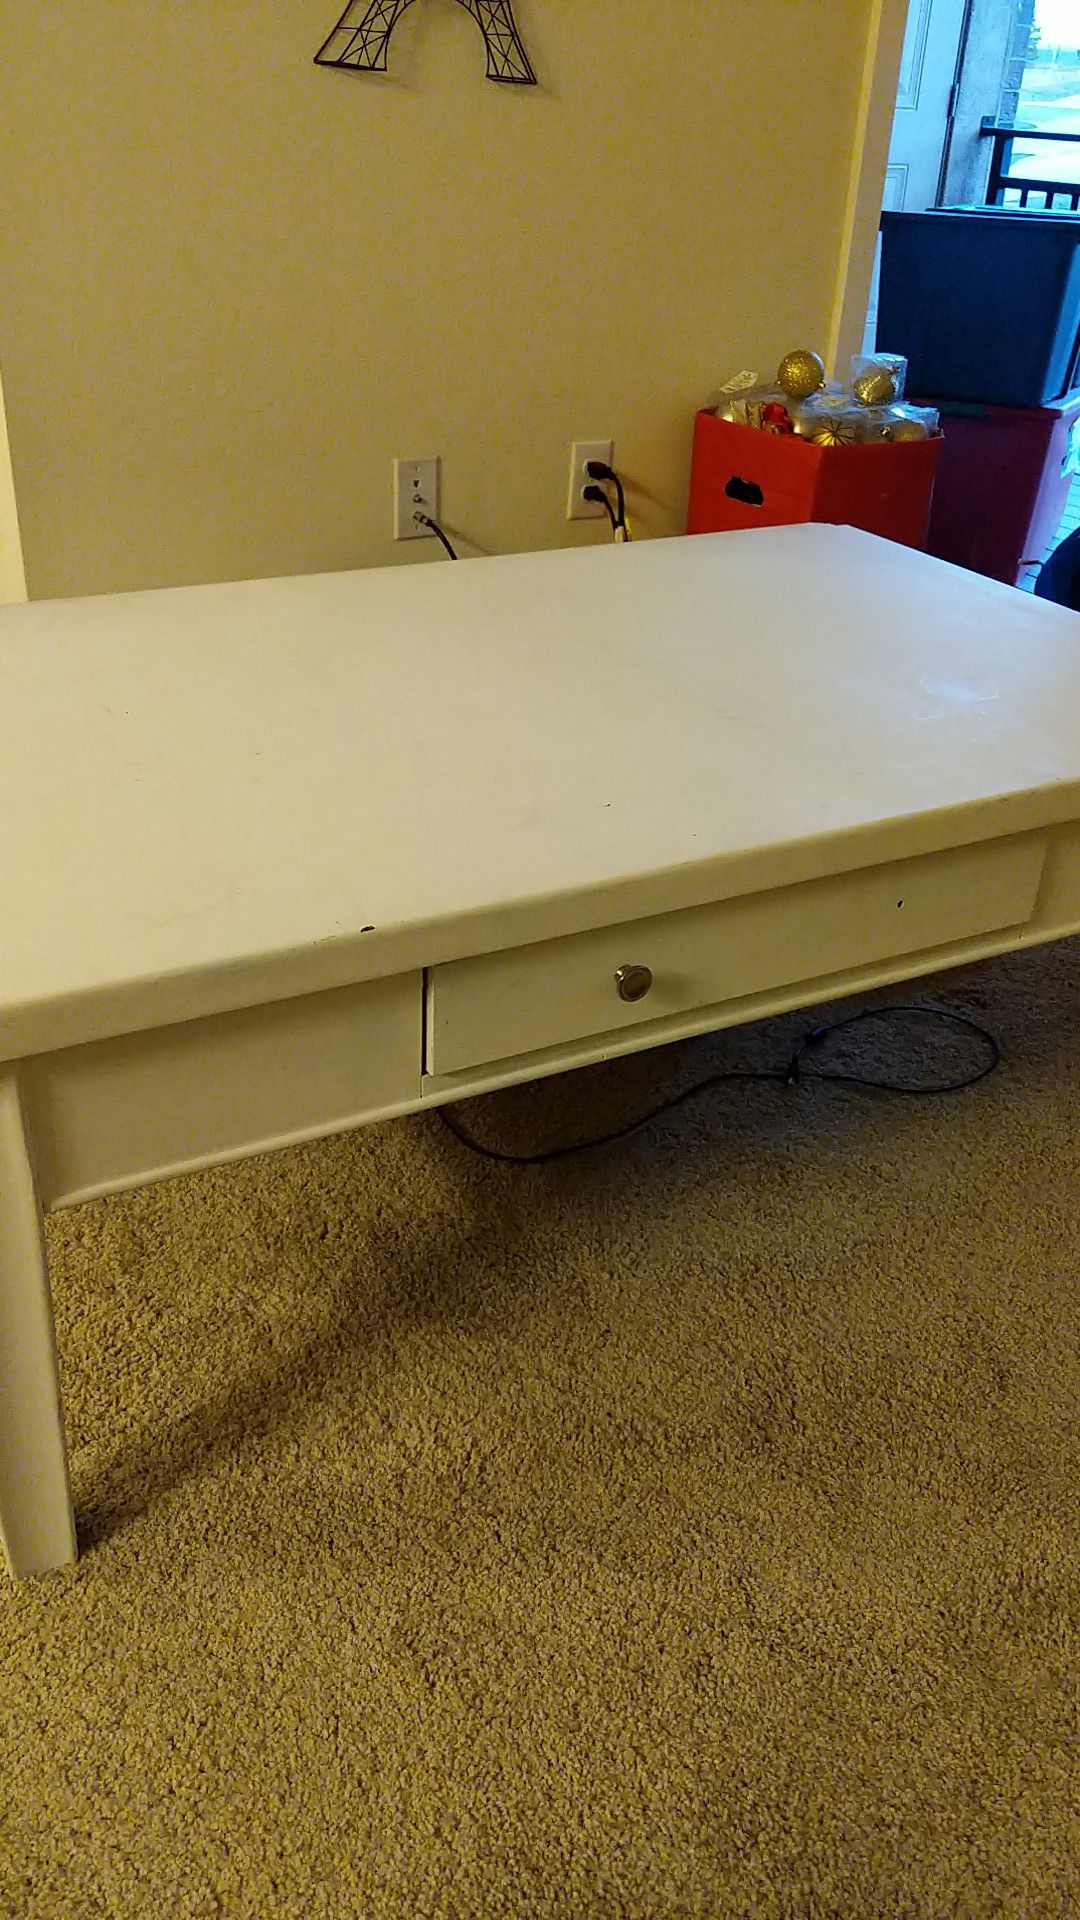 Large white coffee table